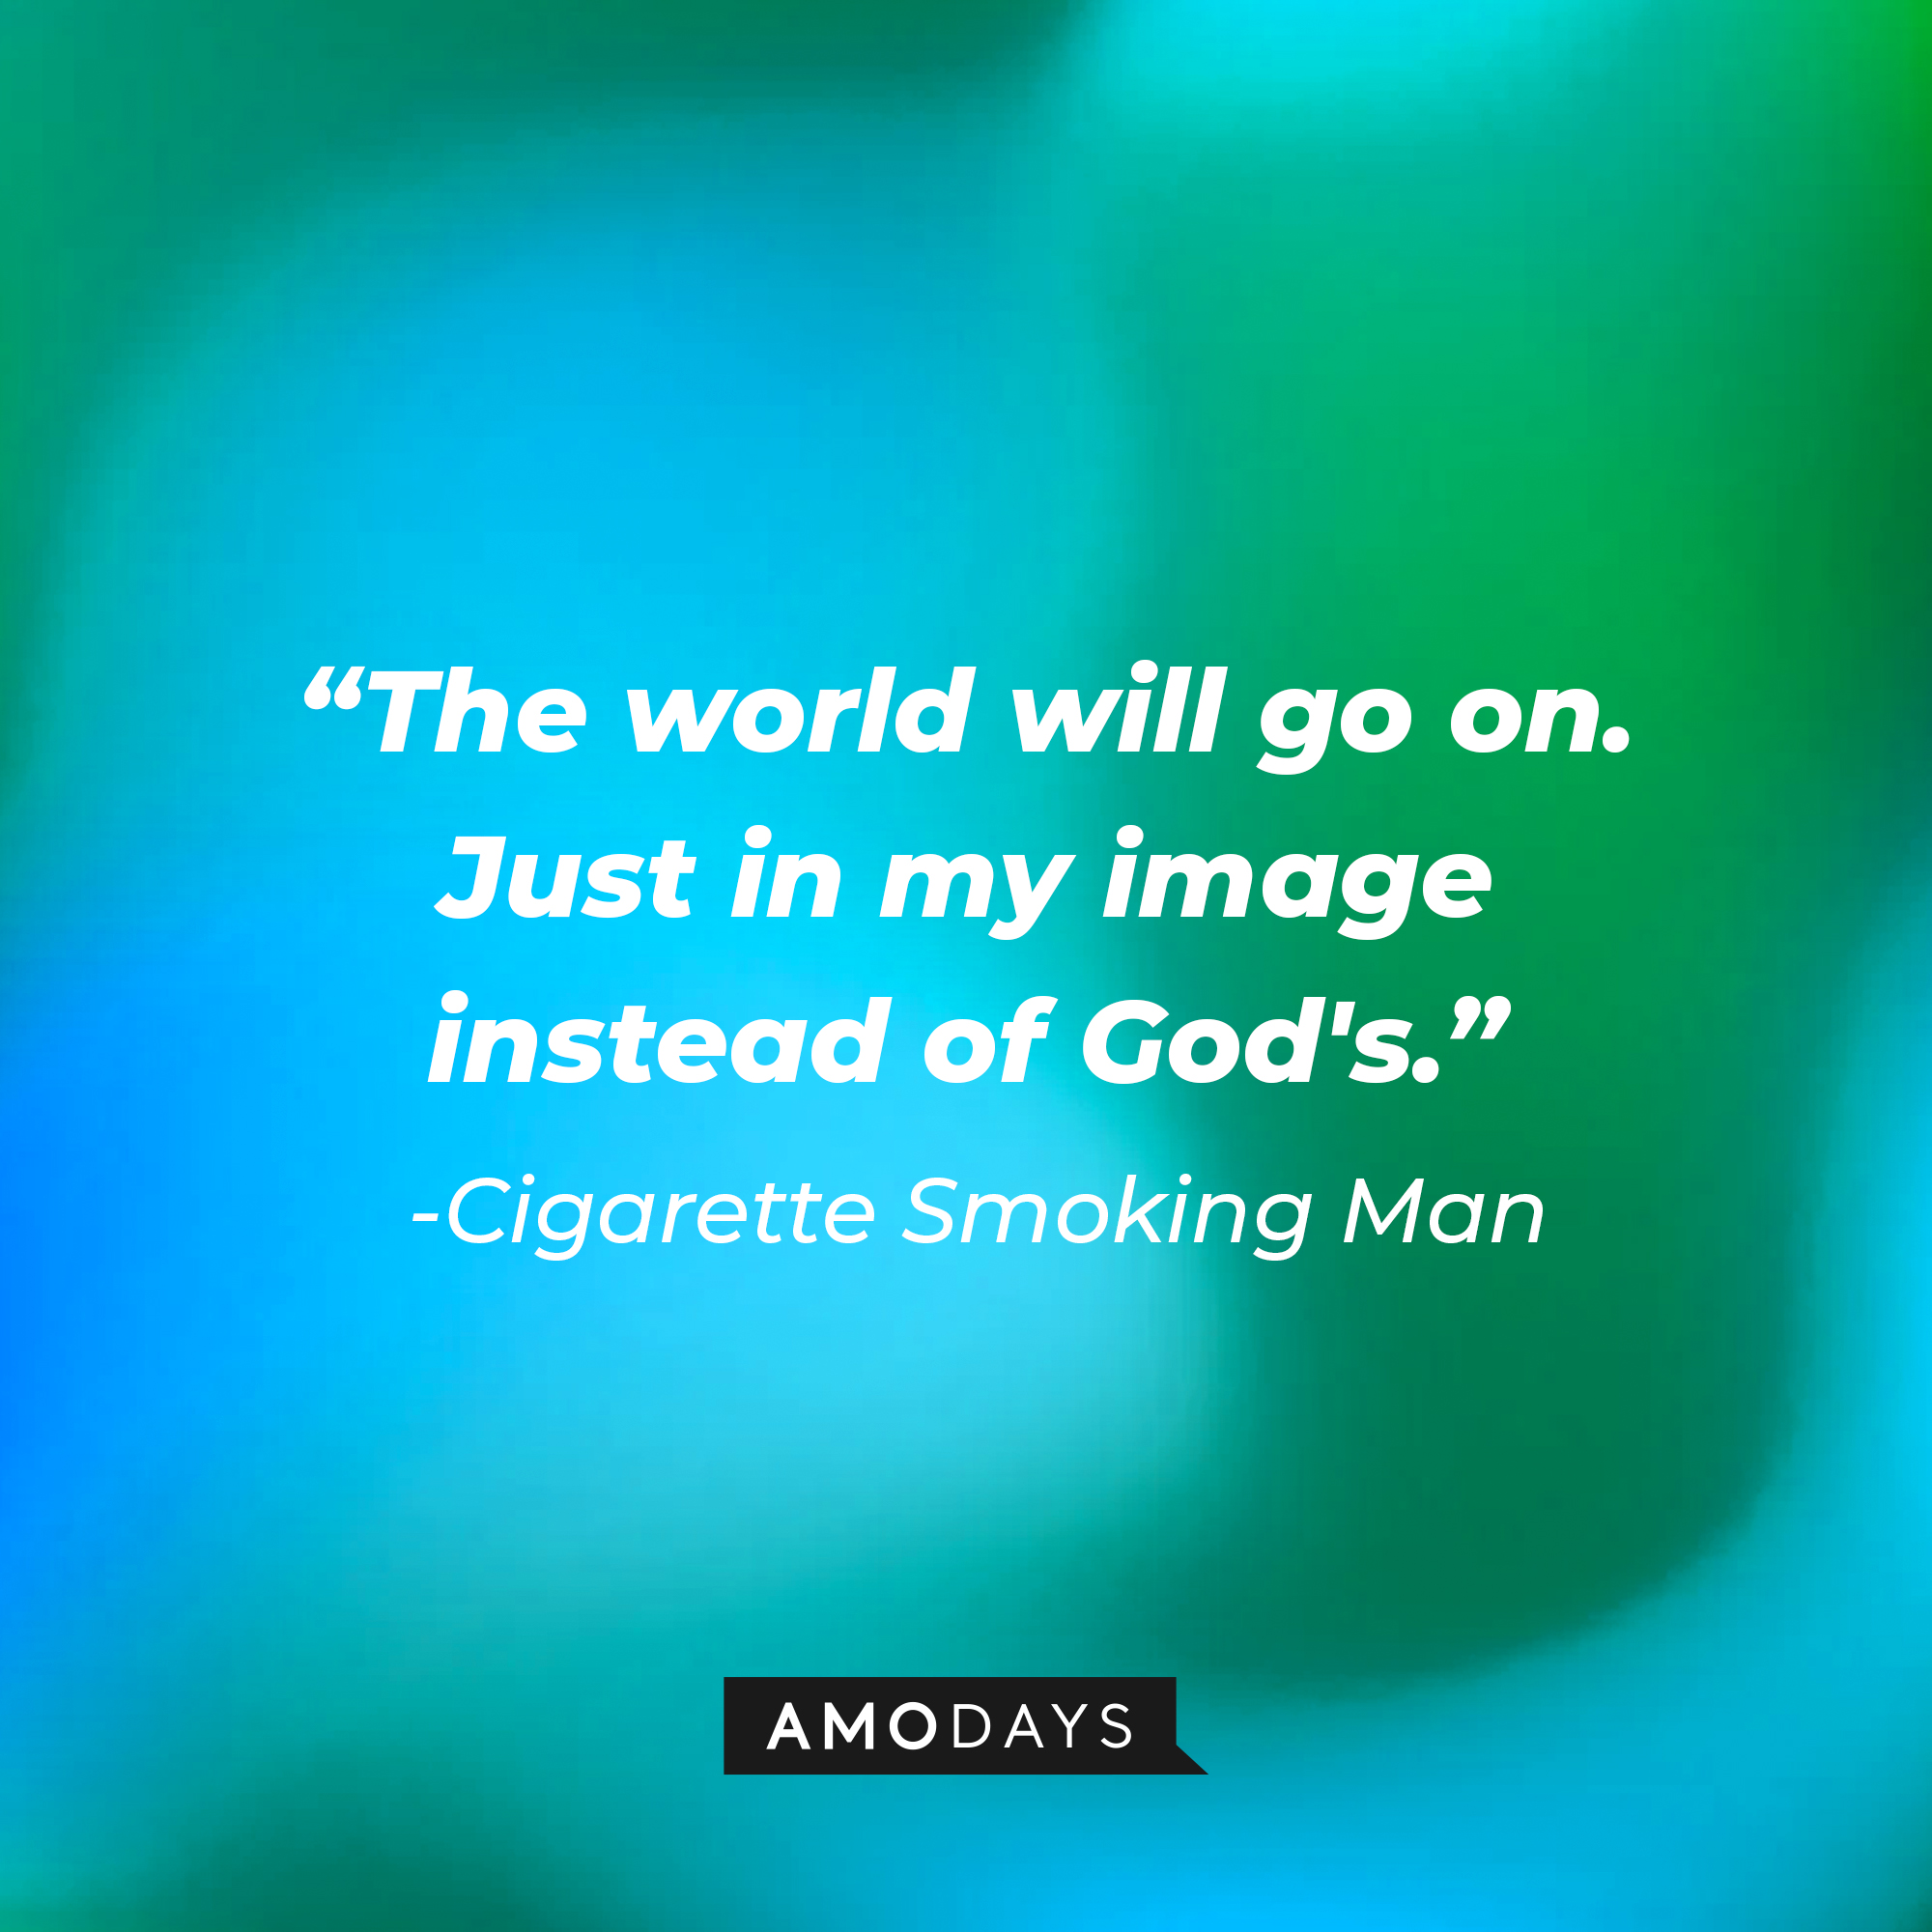 Cigarette Smoking Man's quote: "The world will go on. Just in my image instead of God's." | Source: AmoDays